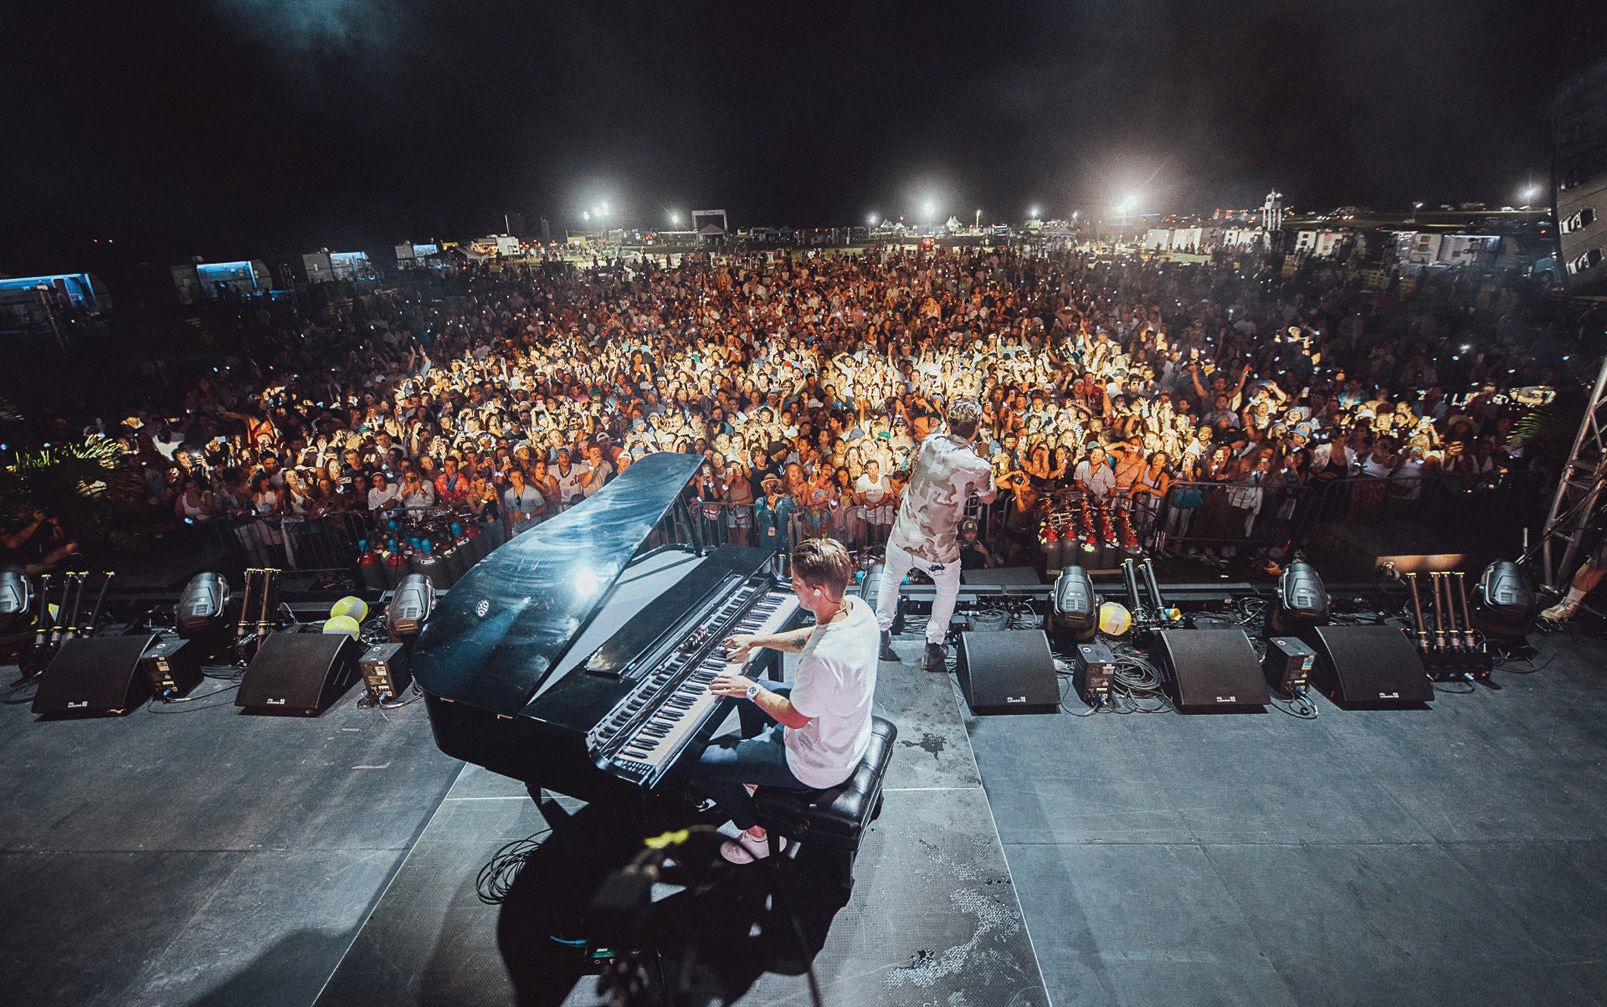 Kygo performing at last year’s Palm Tree Music Festival. PHOTO BY JOHANNES LOVUND